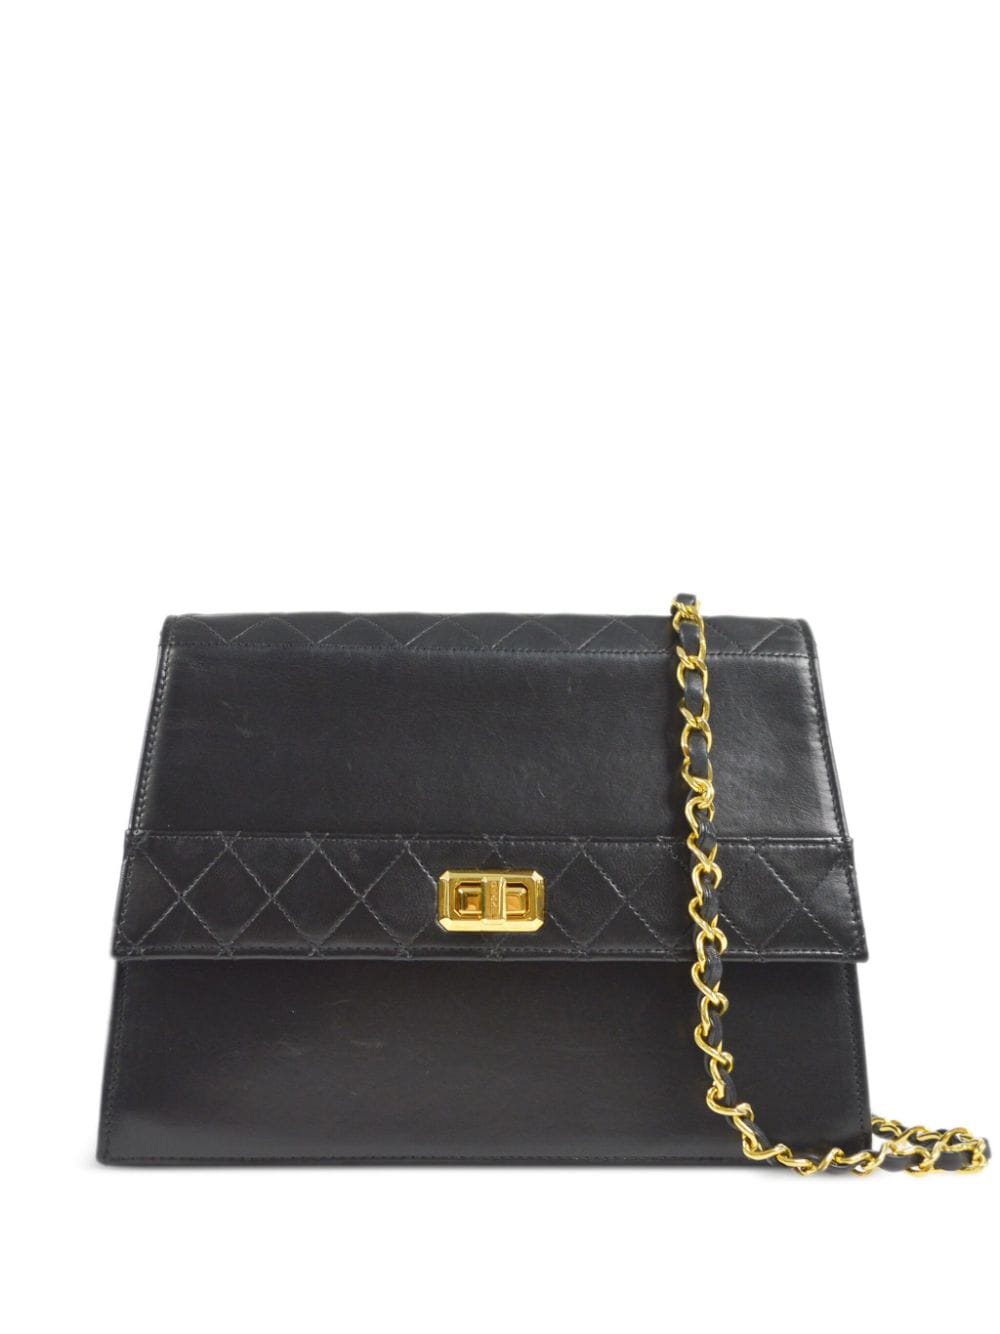 Chanel Vintage Square Stitch Kiss Lock Flap Bag Quilted Lambskin